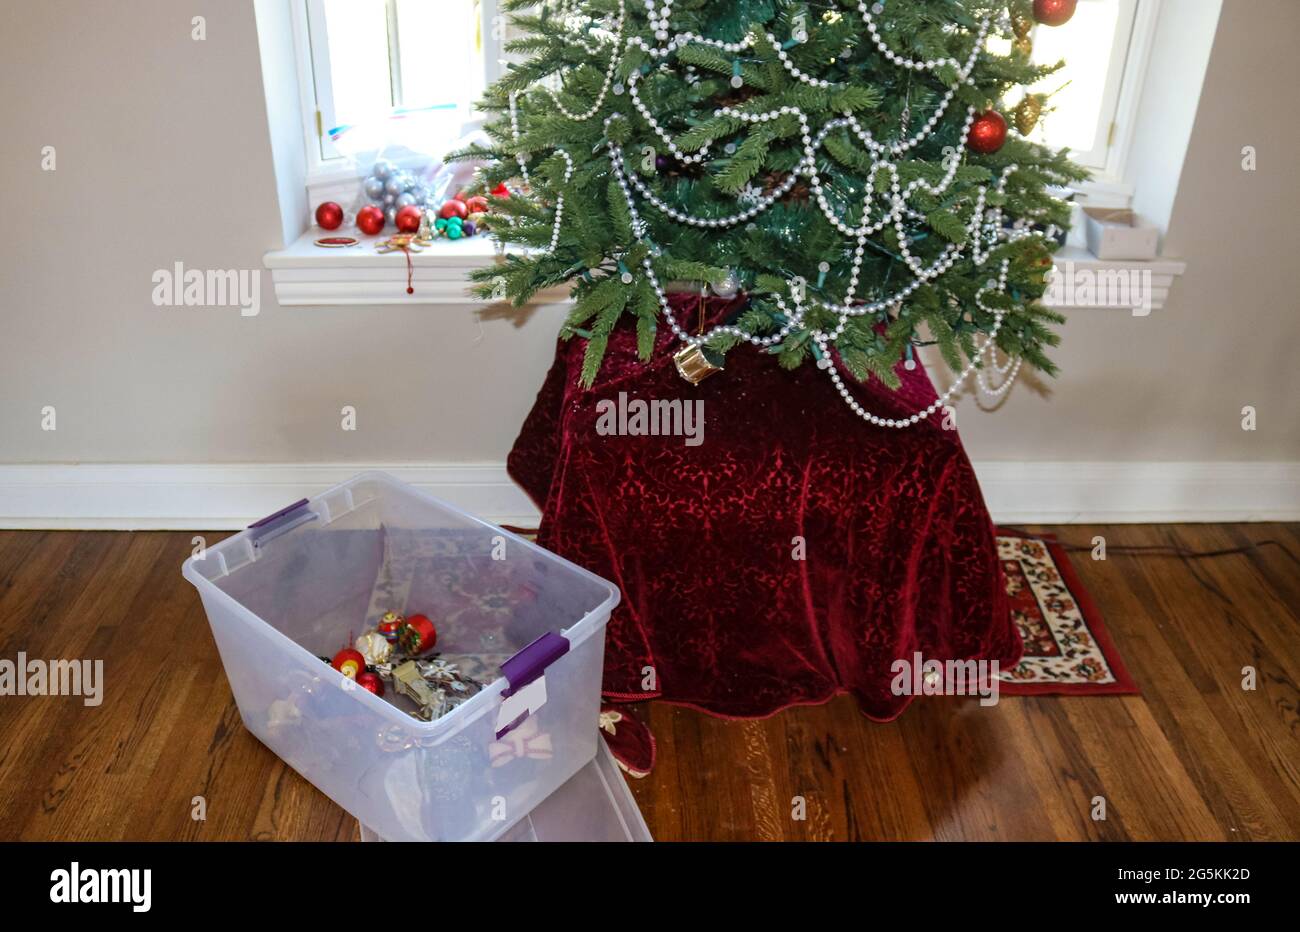 Taking down the Christmas tree....Most ornaments gone with plastic container holding some on floor by tree Stock Photo